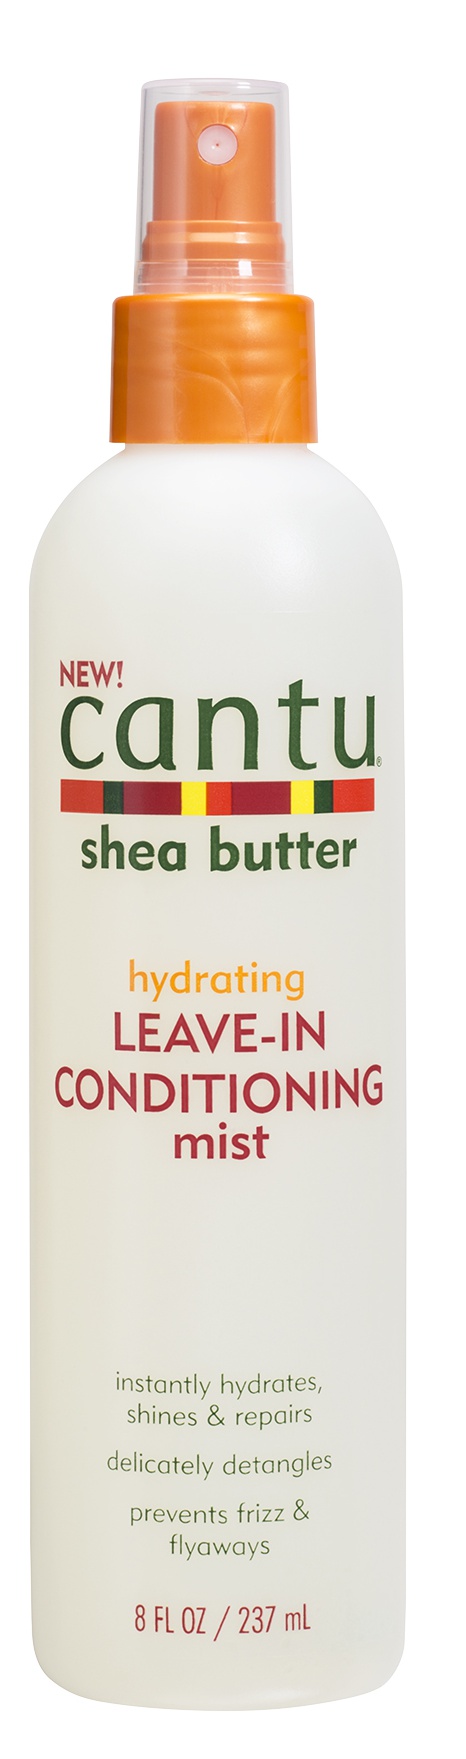 Cantu Shea Butter Hydrating Leave-in Conditioning Mist